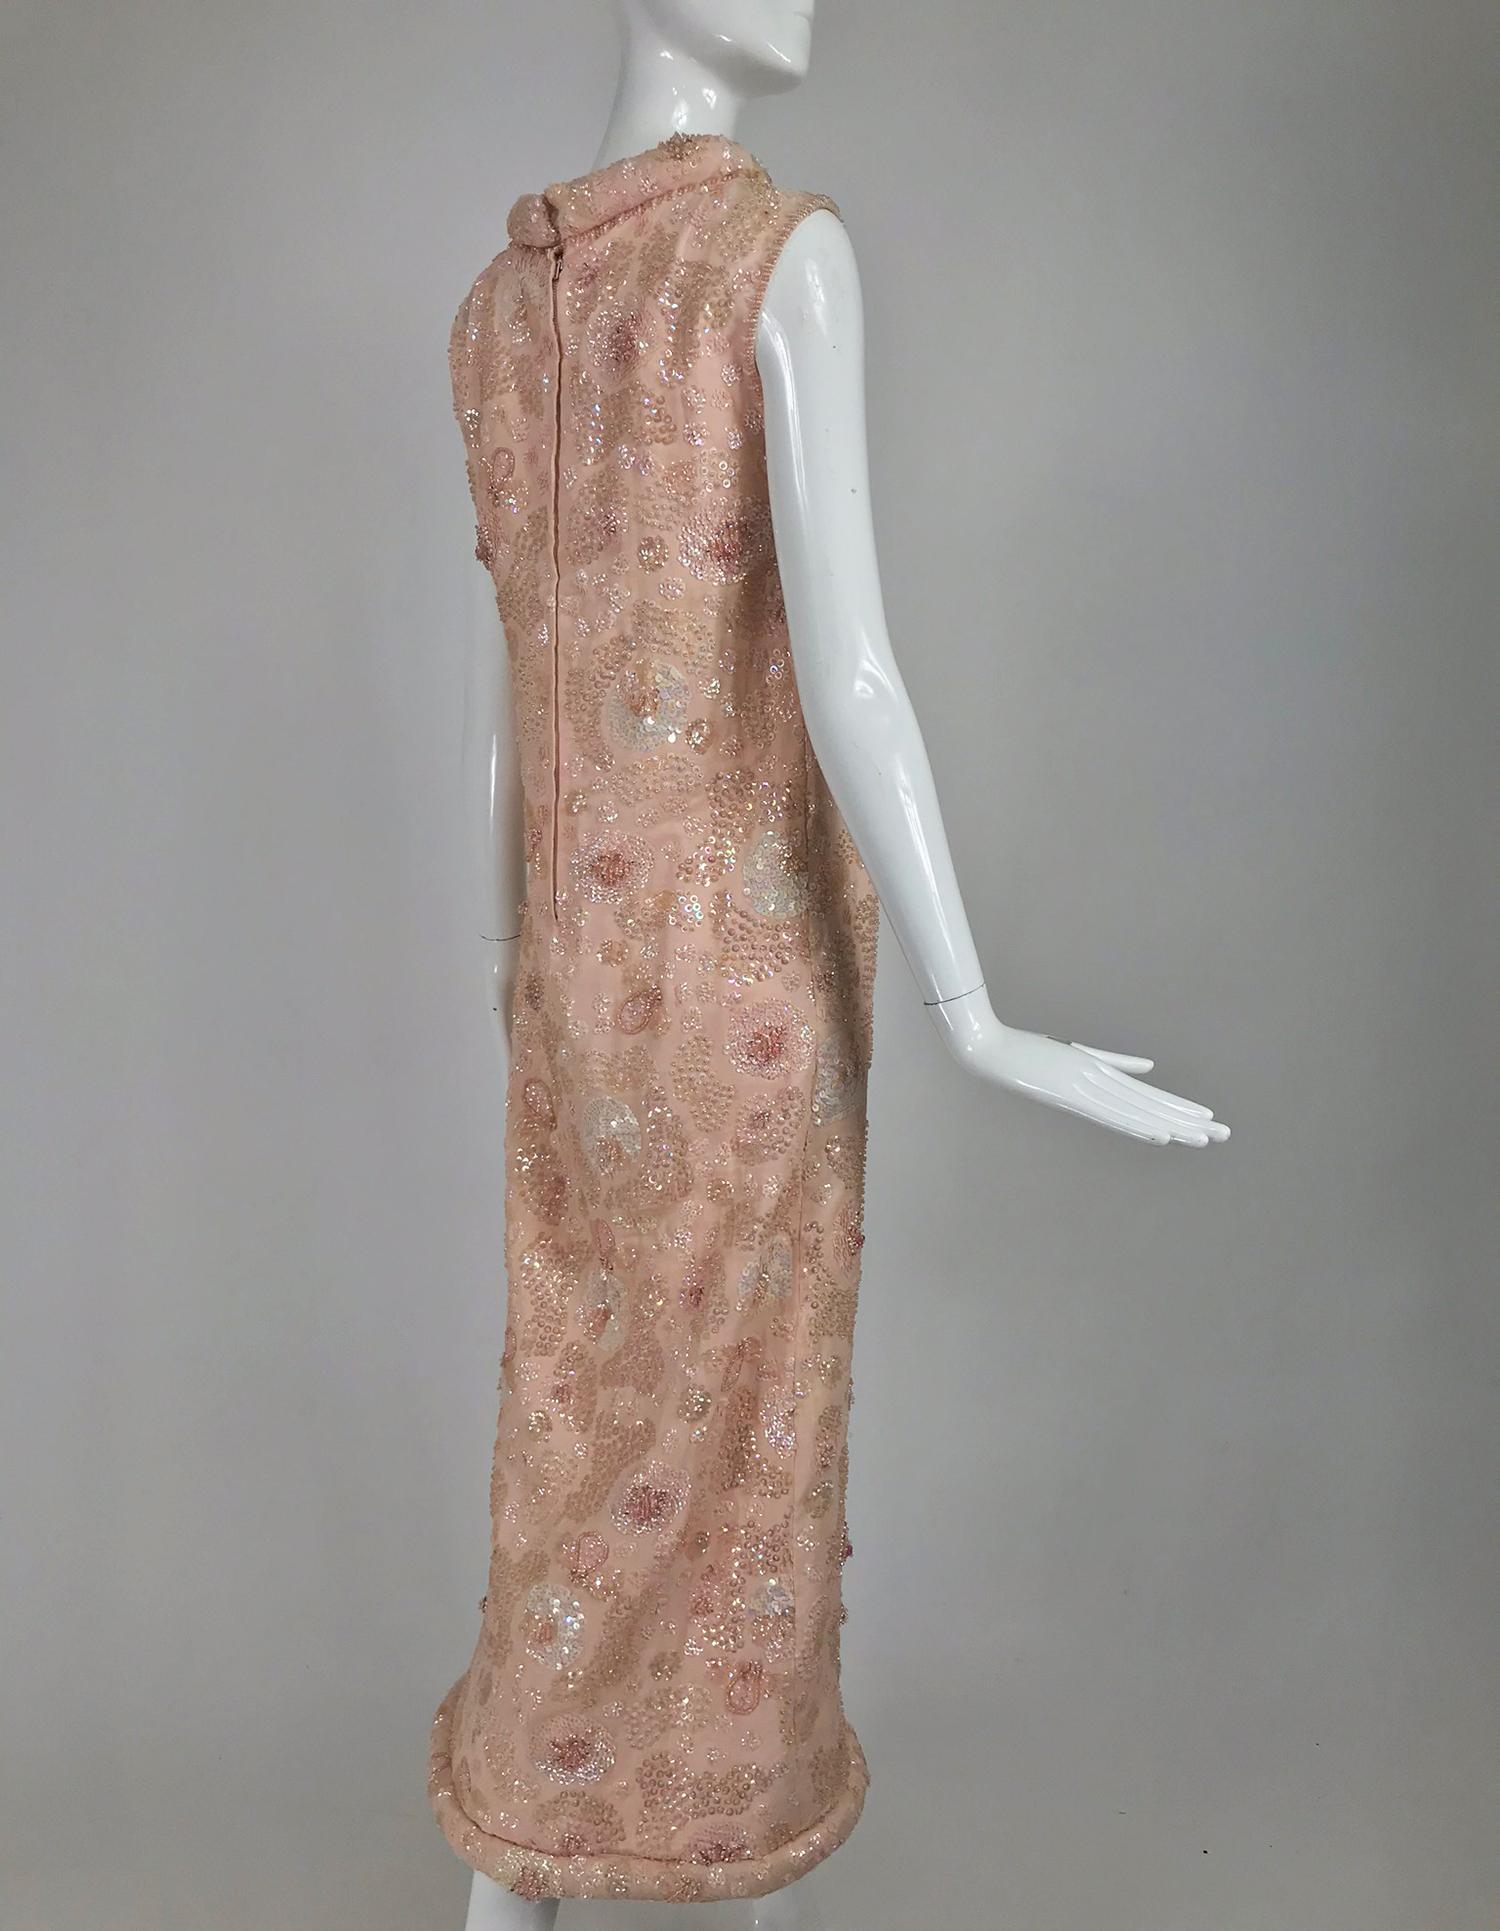 Women's Vintage Bonwit Teller Pale Pink Beaded Sequin Demi Couture Gown 1960s